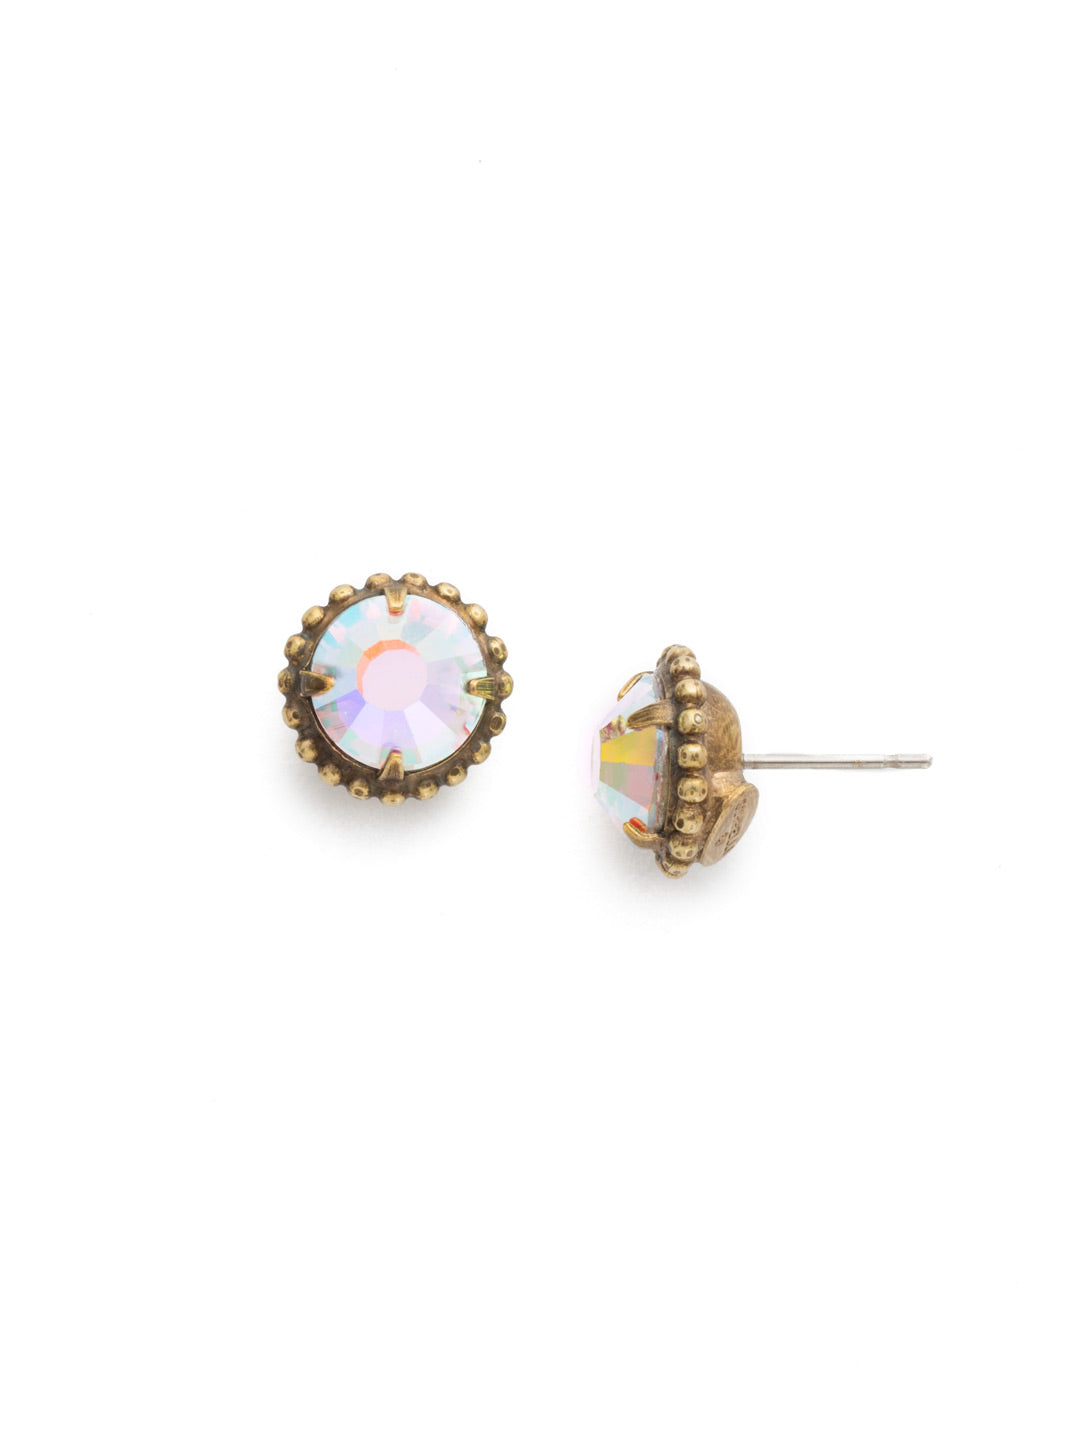 Simplicity Stud Earrings - EBY38AGCAB - <p>A timeless classic, the Simplicity Stud Earrings feature round cut crystals in a variety of colors; accented with a halo of metal beaded detail. Need help picking a stud? <a href="https://www.sorrelli.com/blogs/sisterhood/round-stud-earrings-101-a-rundown-of-sizes-styles-and-sparkle">Check out our size guide!</a> From Sorrelli's Crystal Aurora Borealis collection in our Antique Gold-tone finish.</p>